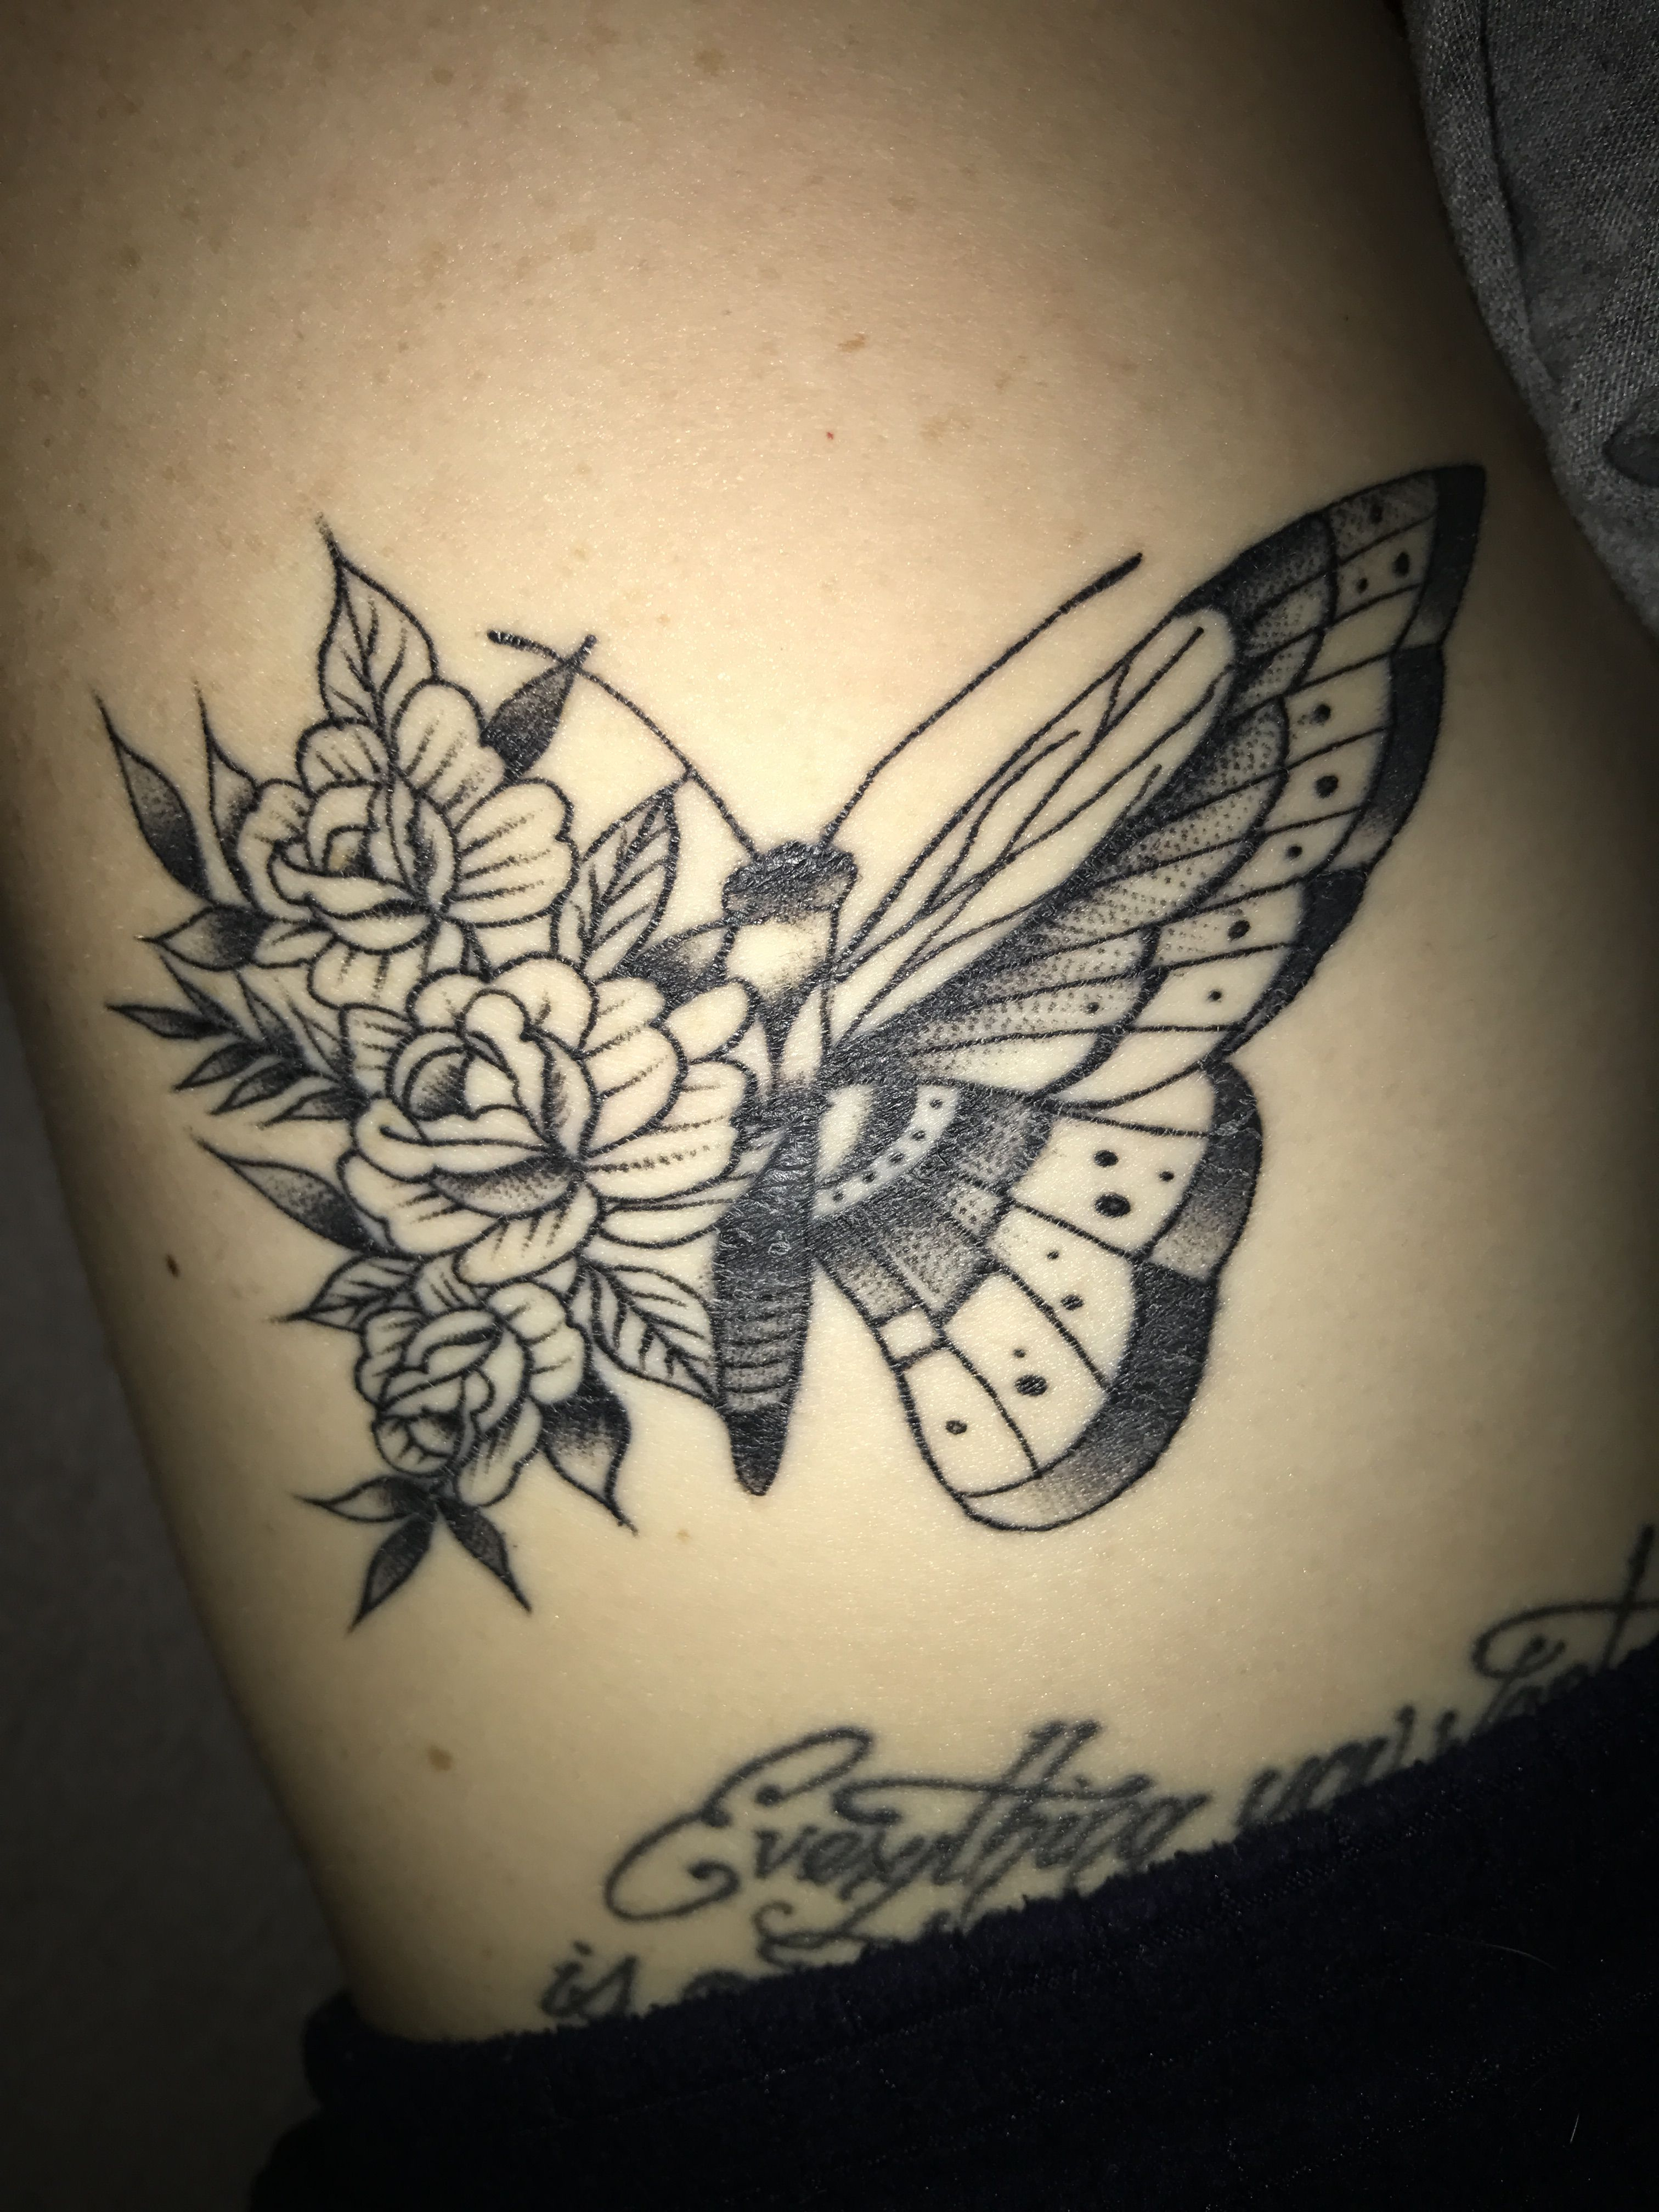 Butterfly Tattoo With Flower Wing Tattoos Tattoos Flowers Drawings in sizing 3024 X 4032